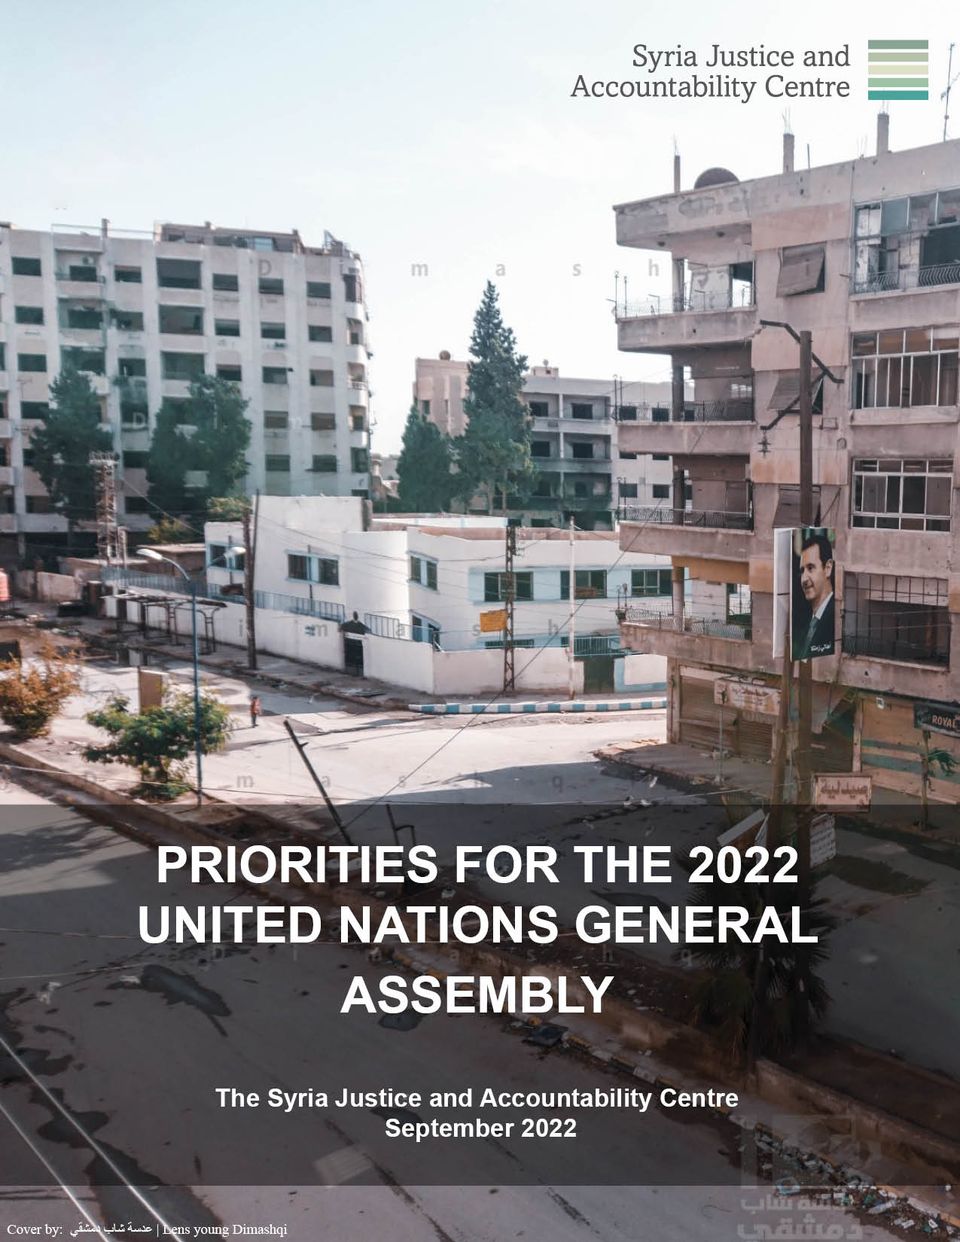 PRIORITIES FOR THE 2022 UNITED NATIONS GENERAL ASSEMBLY